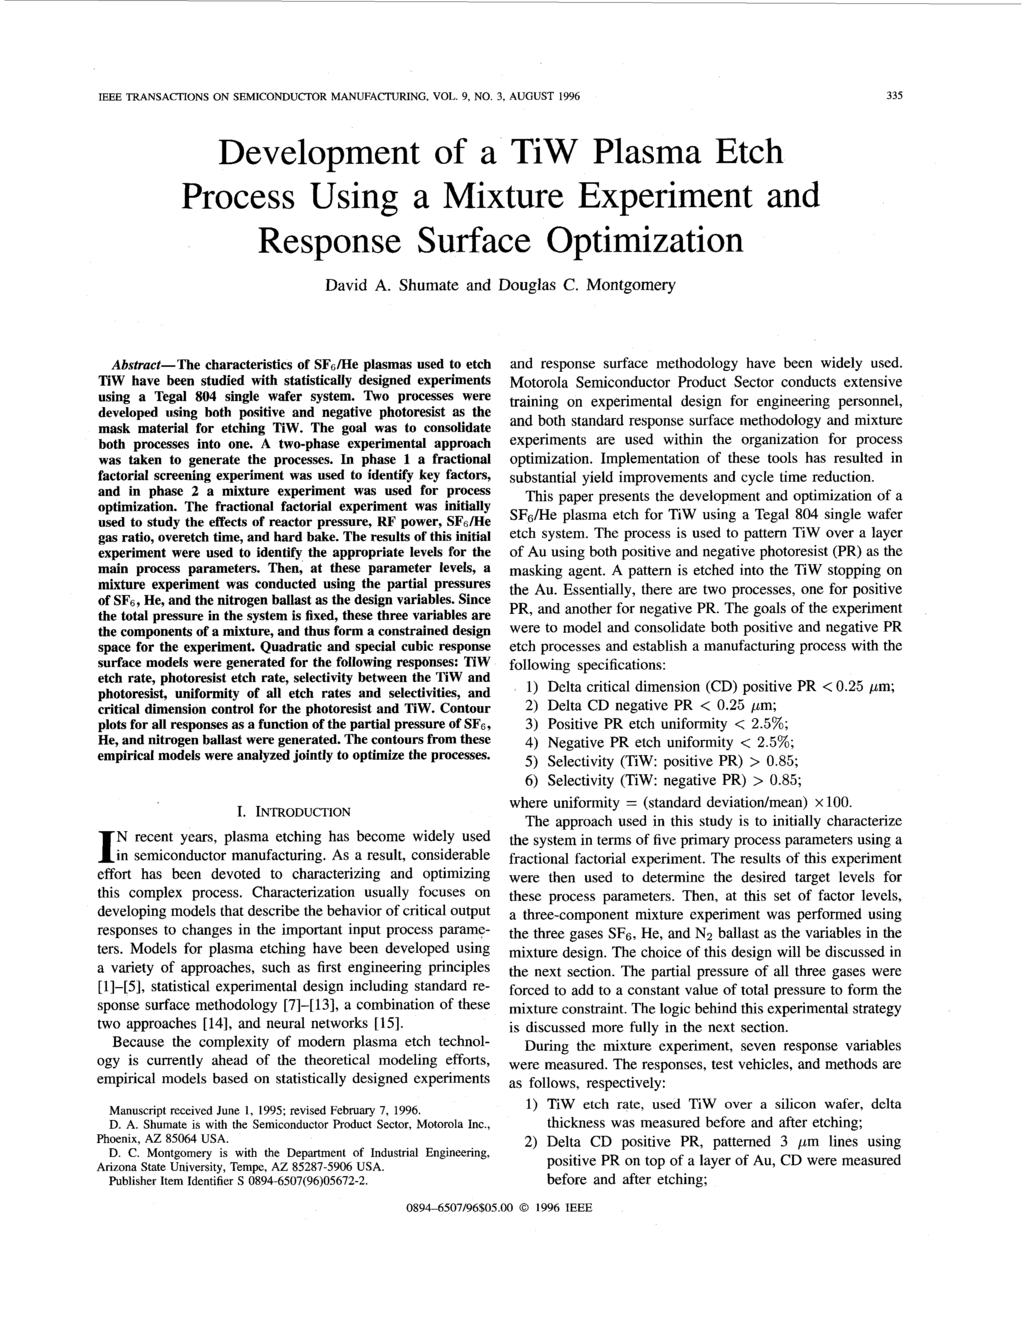 IEEE TRANSACTIONS ON SEMICONDUCTOR MANUFACTURING, VOL. 9, NO. 3, AUGUST 1996 335 Development of a TiW Plasma Etch Process Using a Mixture Experiment and Response Surface Optimization David A.